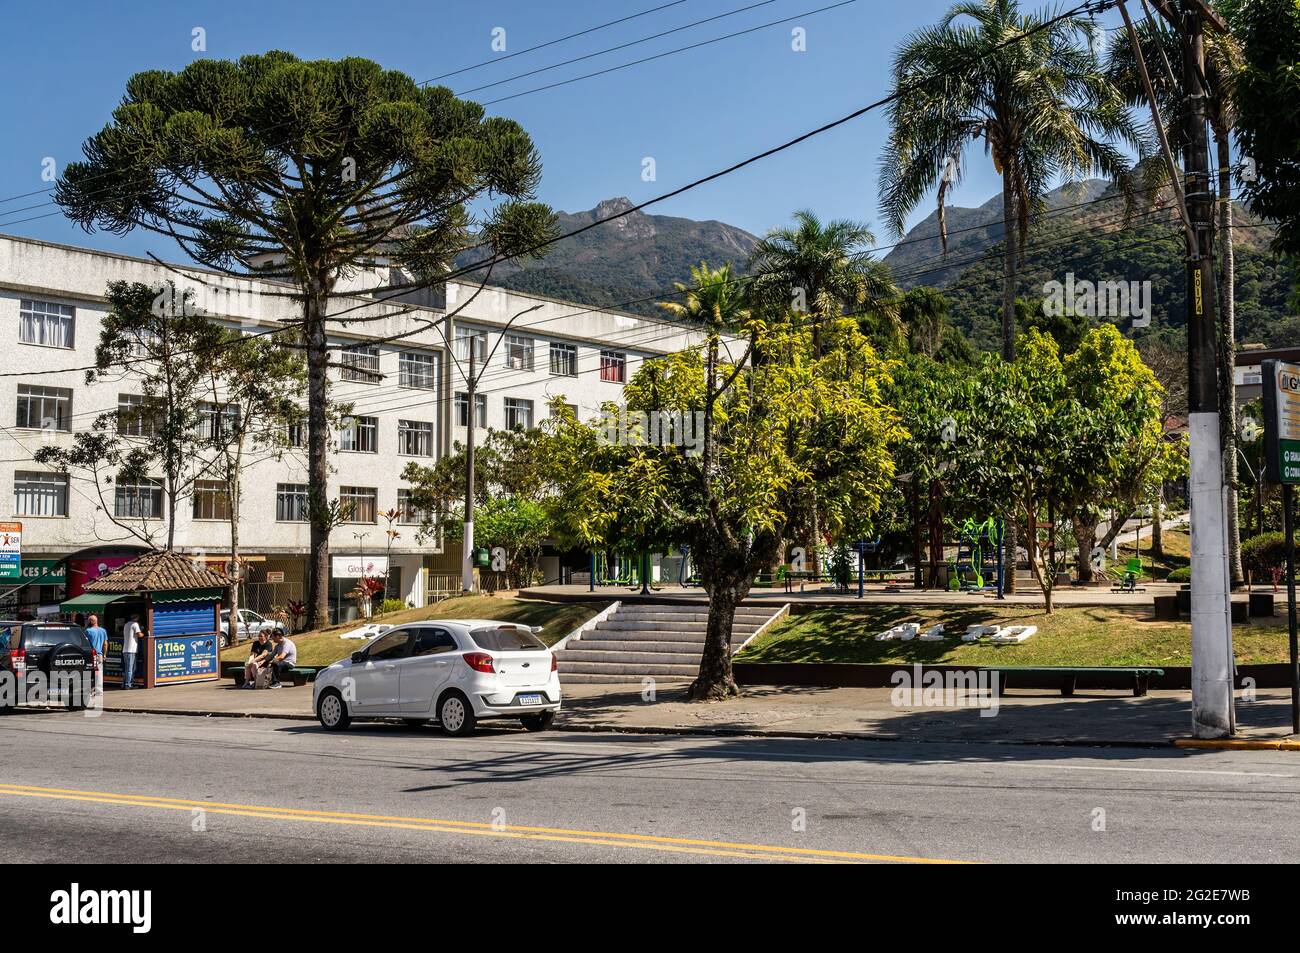 View of Nilo Pecanca square at the side of an apartment building at Oliveira Botelho avenue under sunny clear blue sky day. Stock Photo